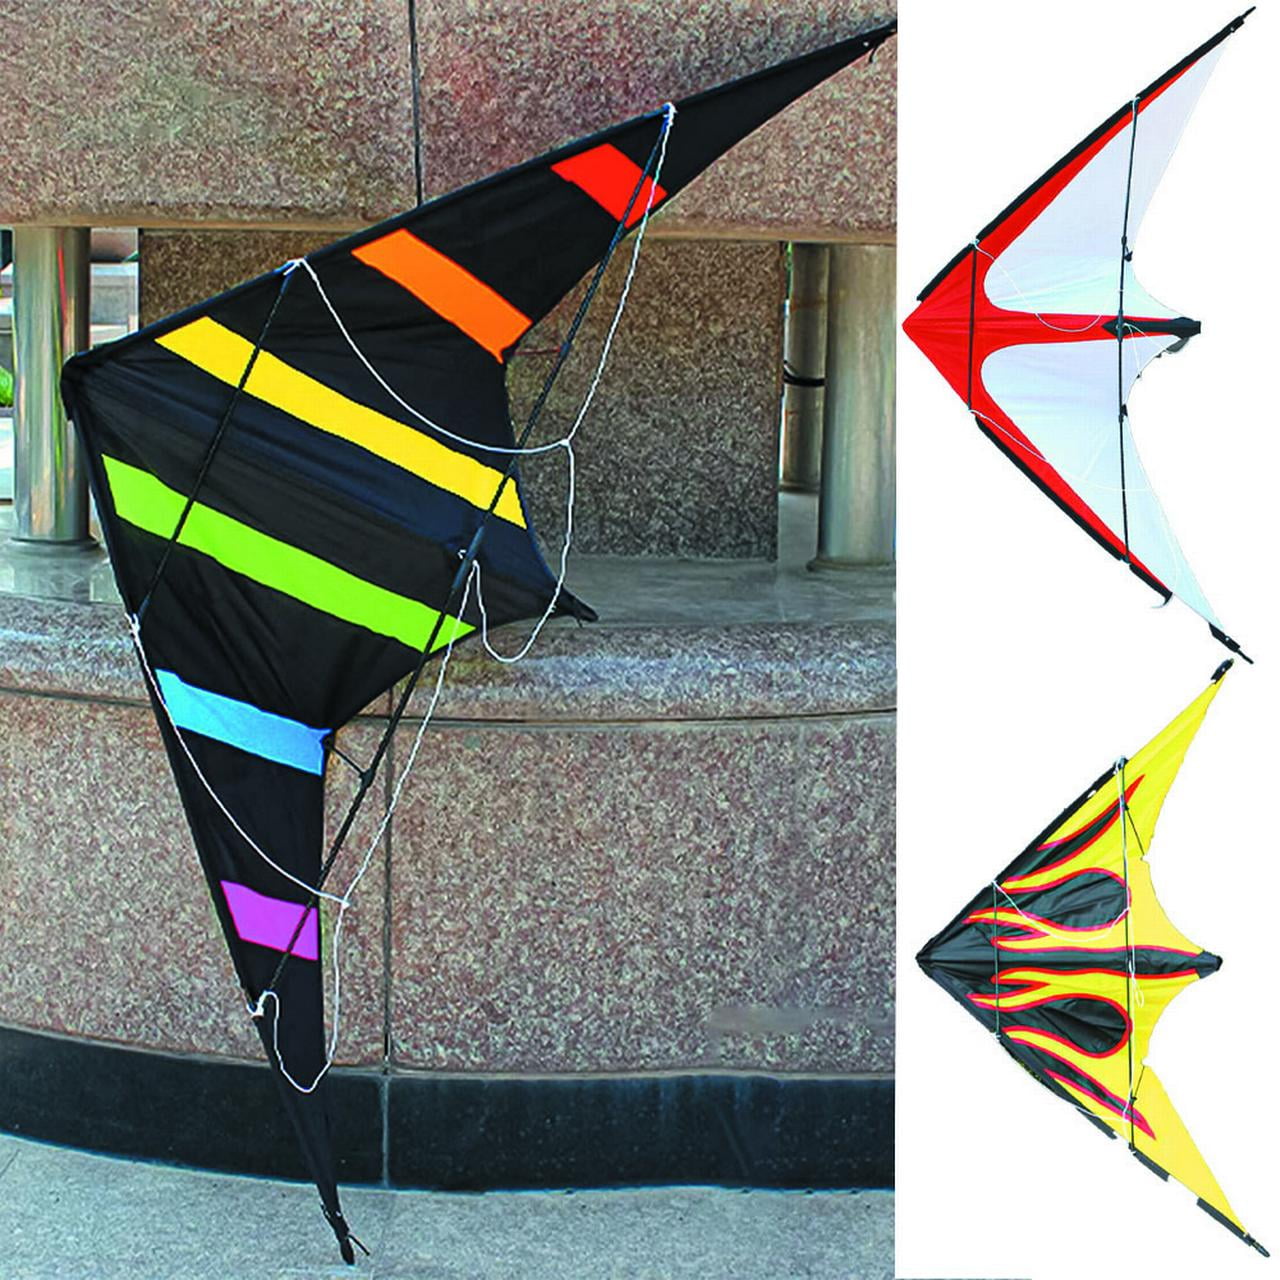 1.2m rainbow triangle+30m Kite Line Single Line For Kids &Adults Easy To Fly New 